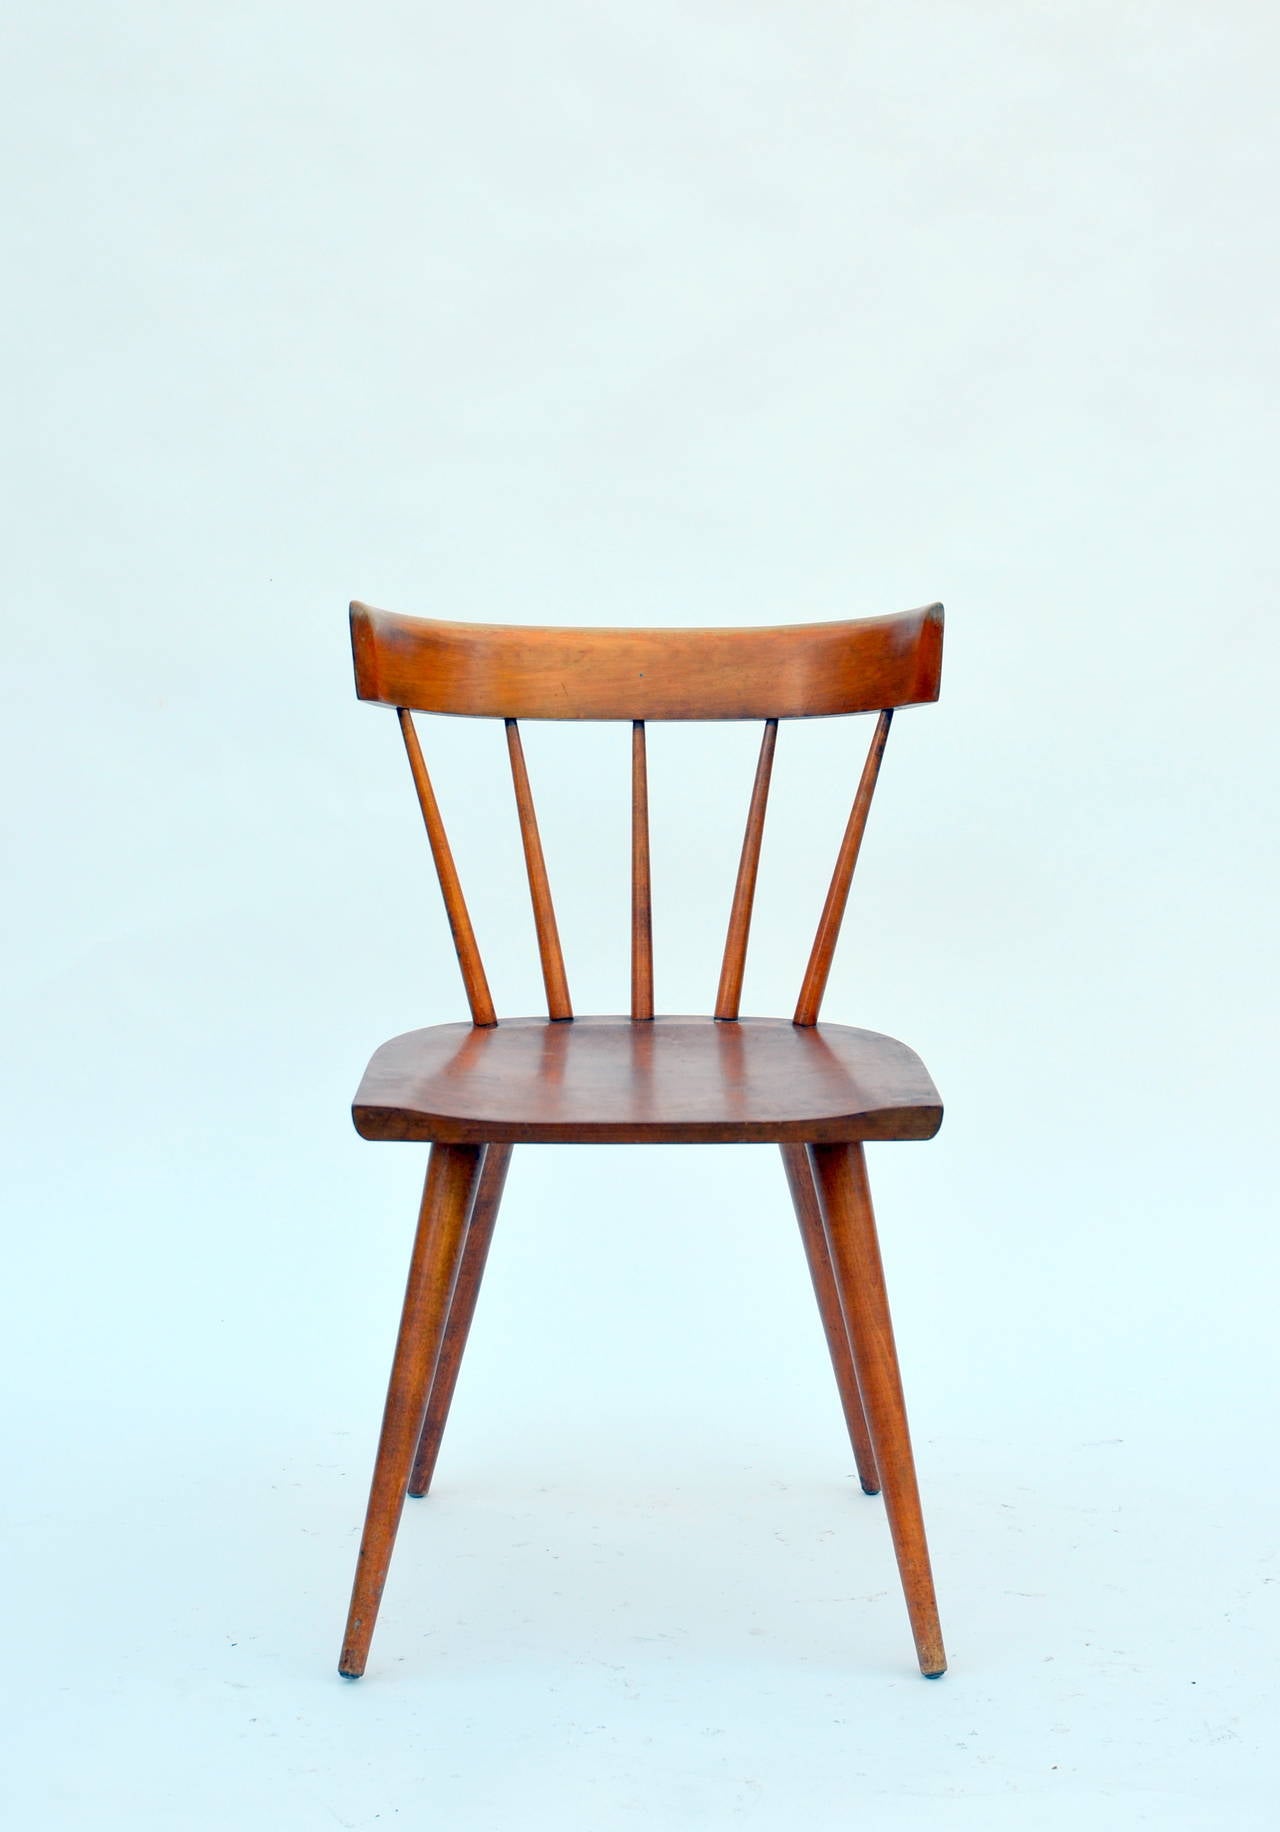 American Set of Five Spindle Back Chairs by Paul McCobb